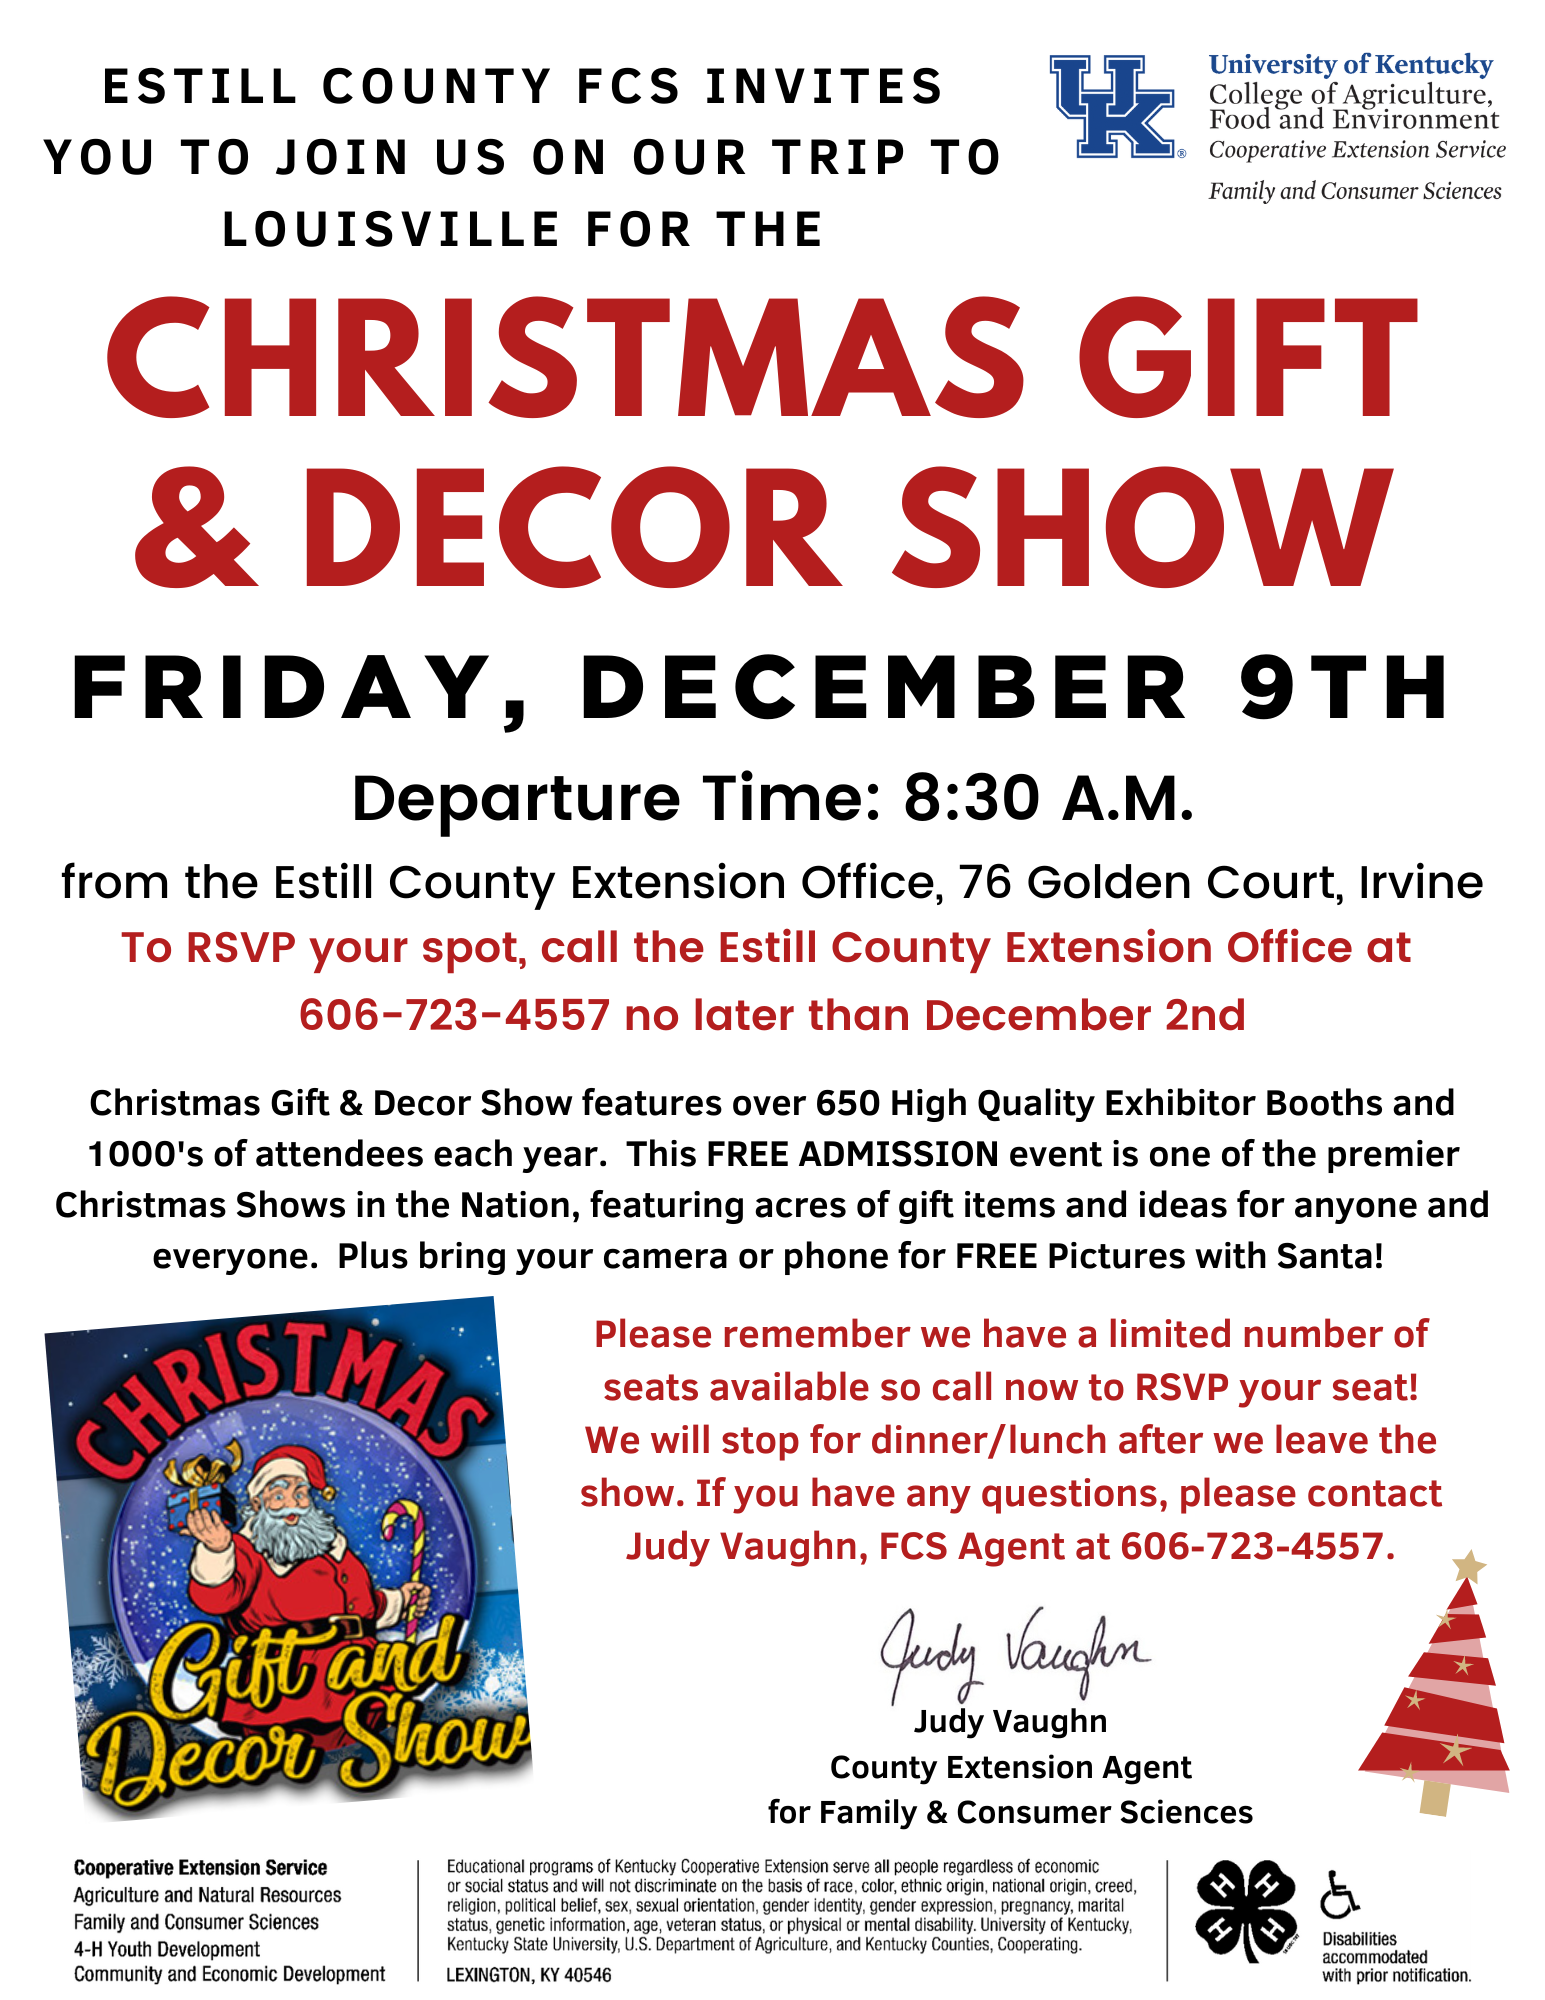 Upcoming Christmas Gift & Décor Show Trip event flyer